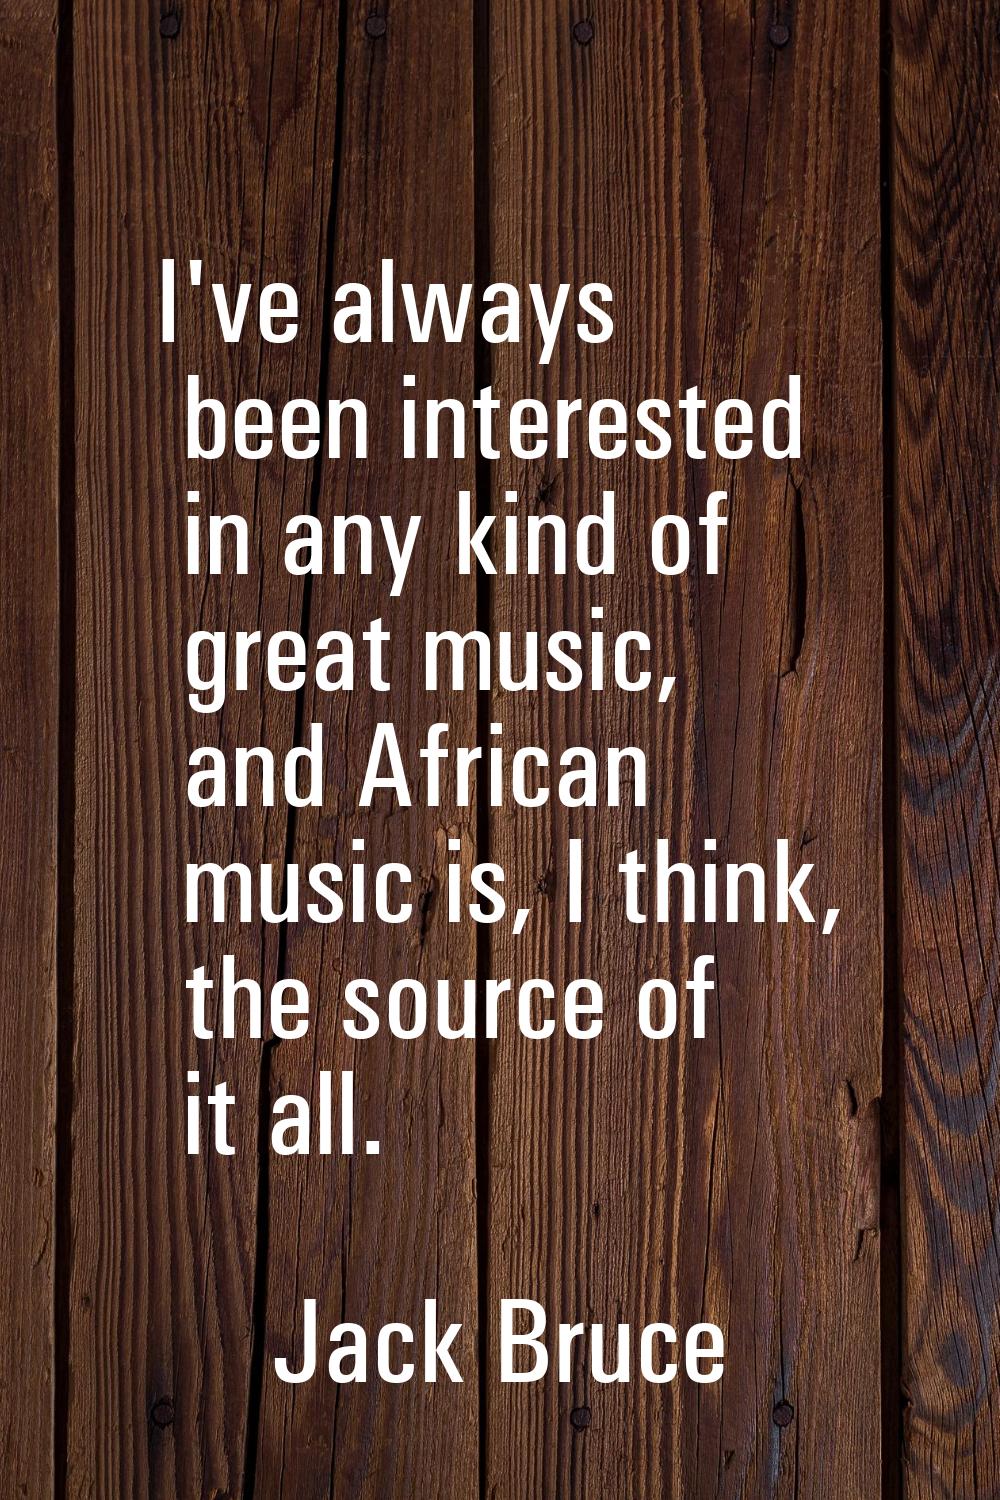 I've always been interested in any kind of great music, and African music is, I think, the source o